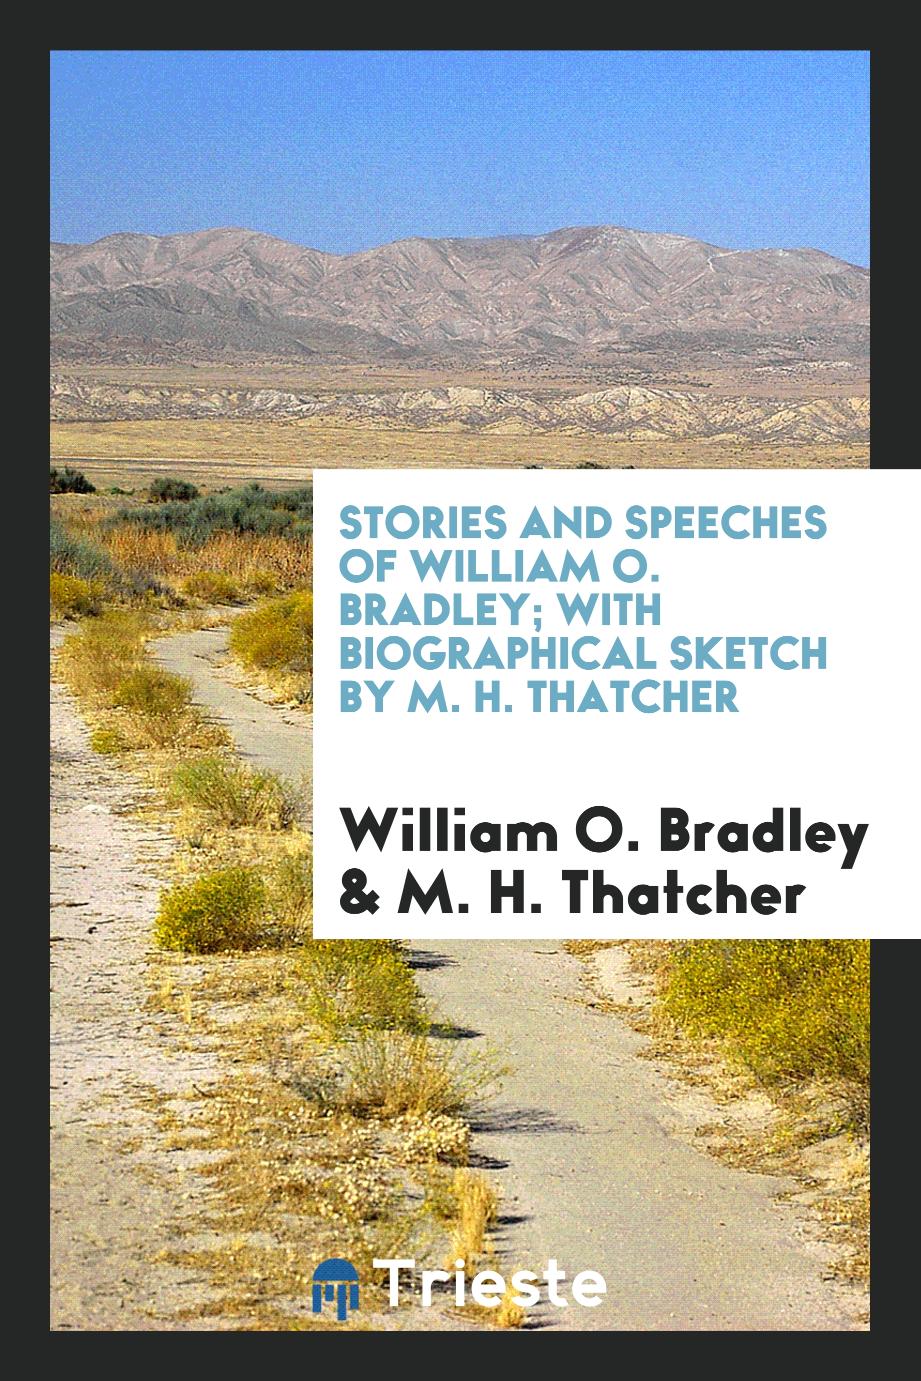 Stories and speeches of William O. Bradley; with biographical sketch by M. H. Thatcher